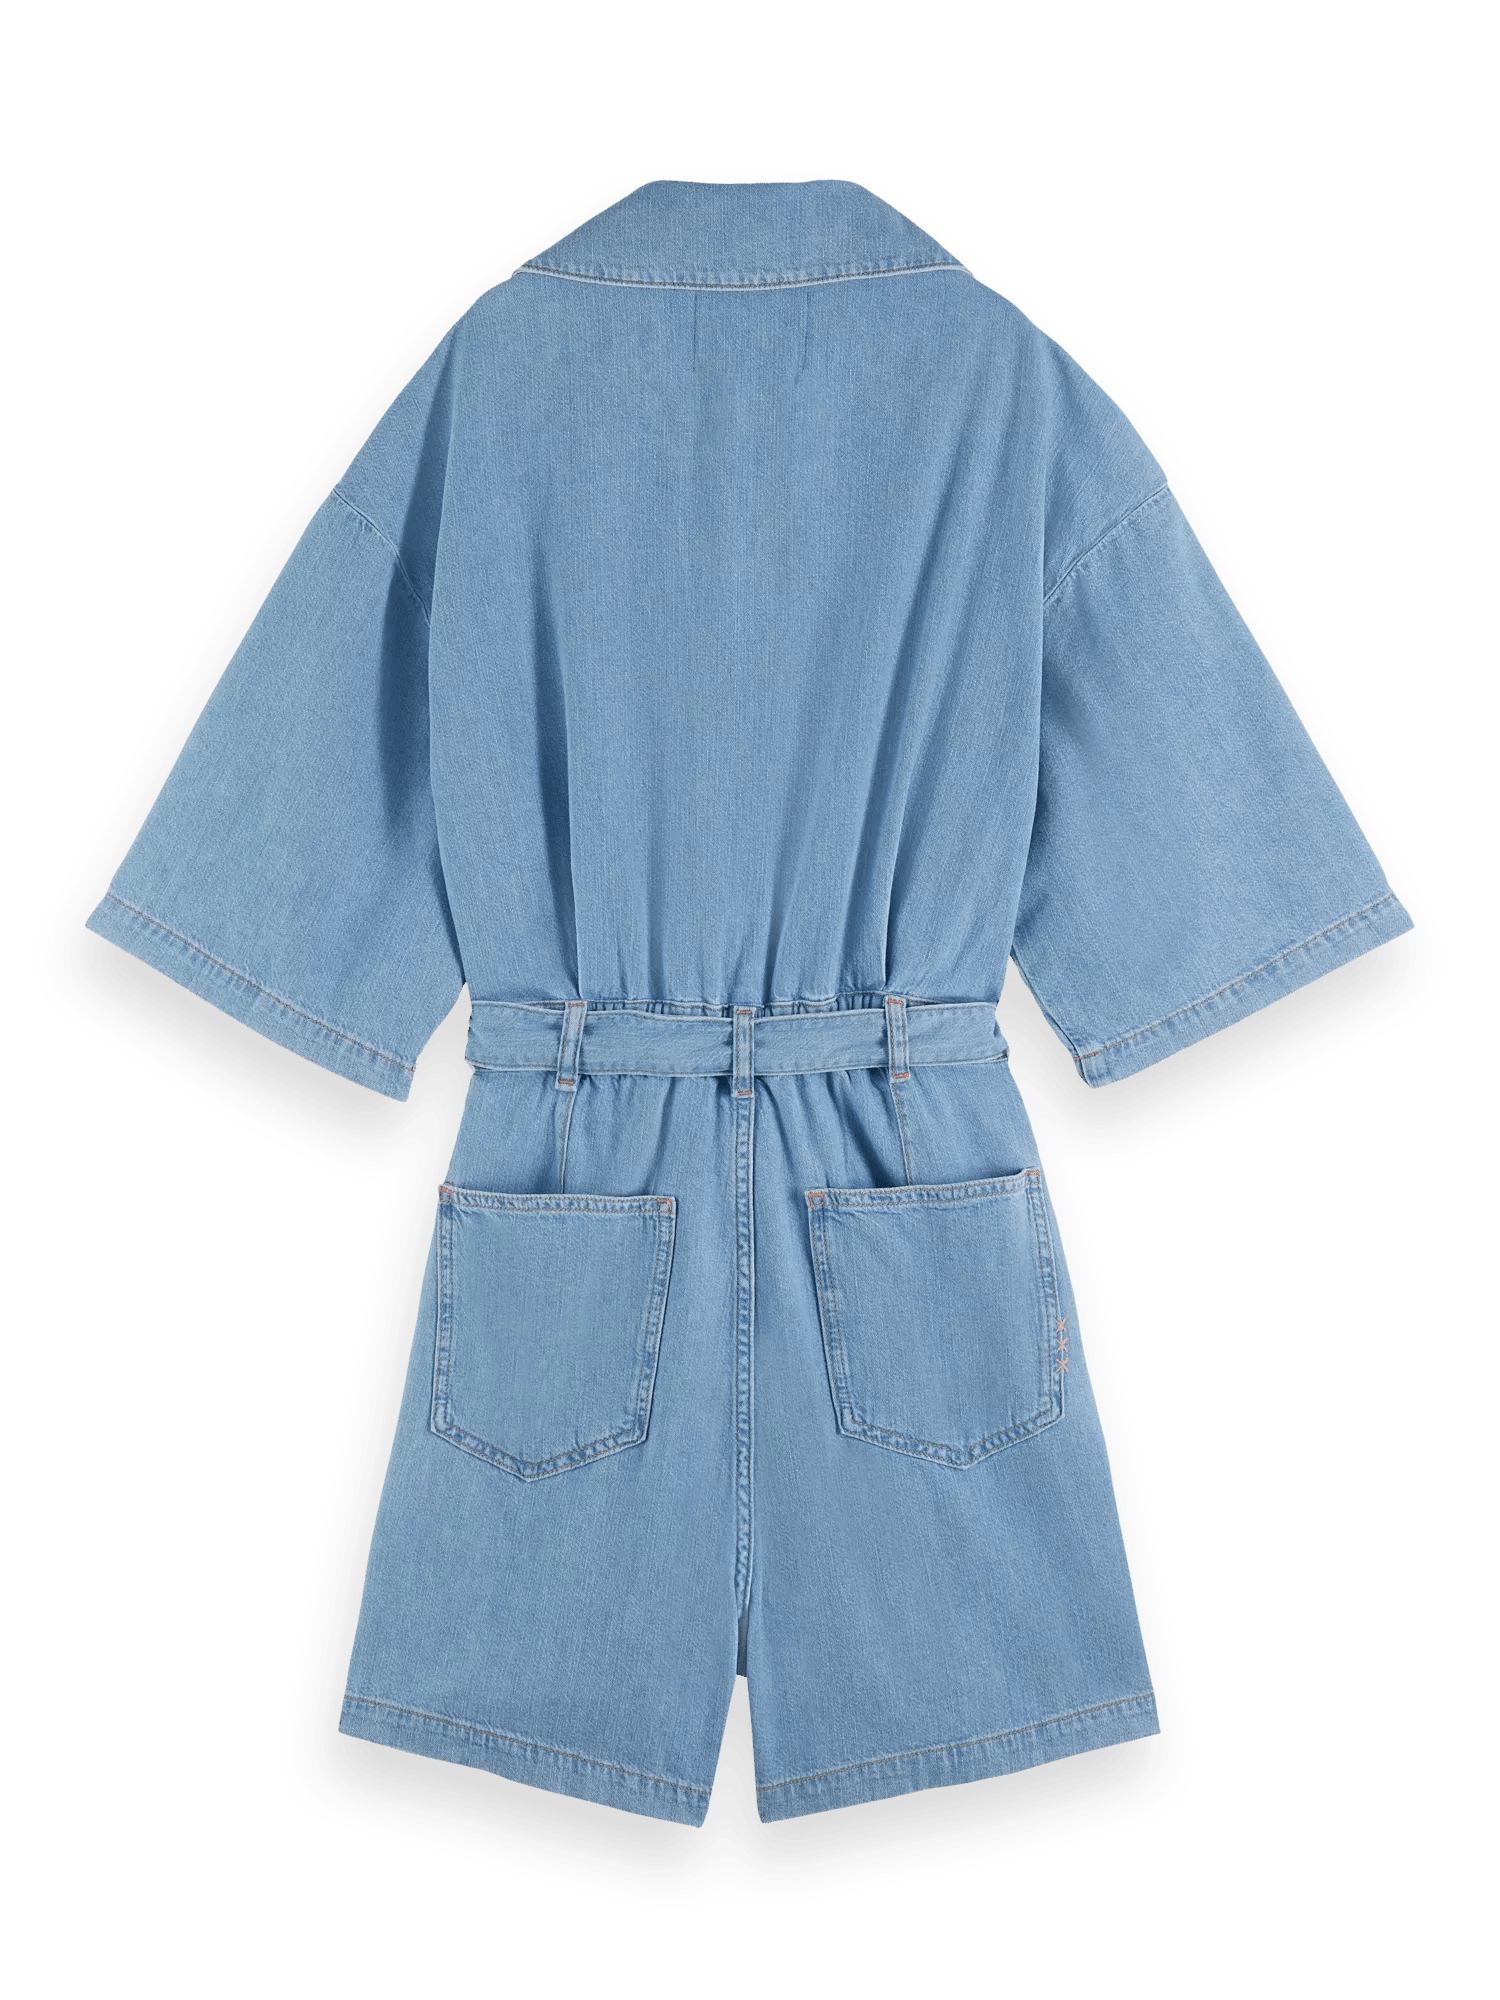 Scotch & Soda Worked out denim jumpsuit - Free Thinker BCK